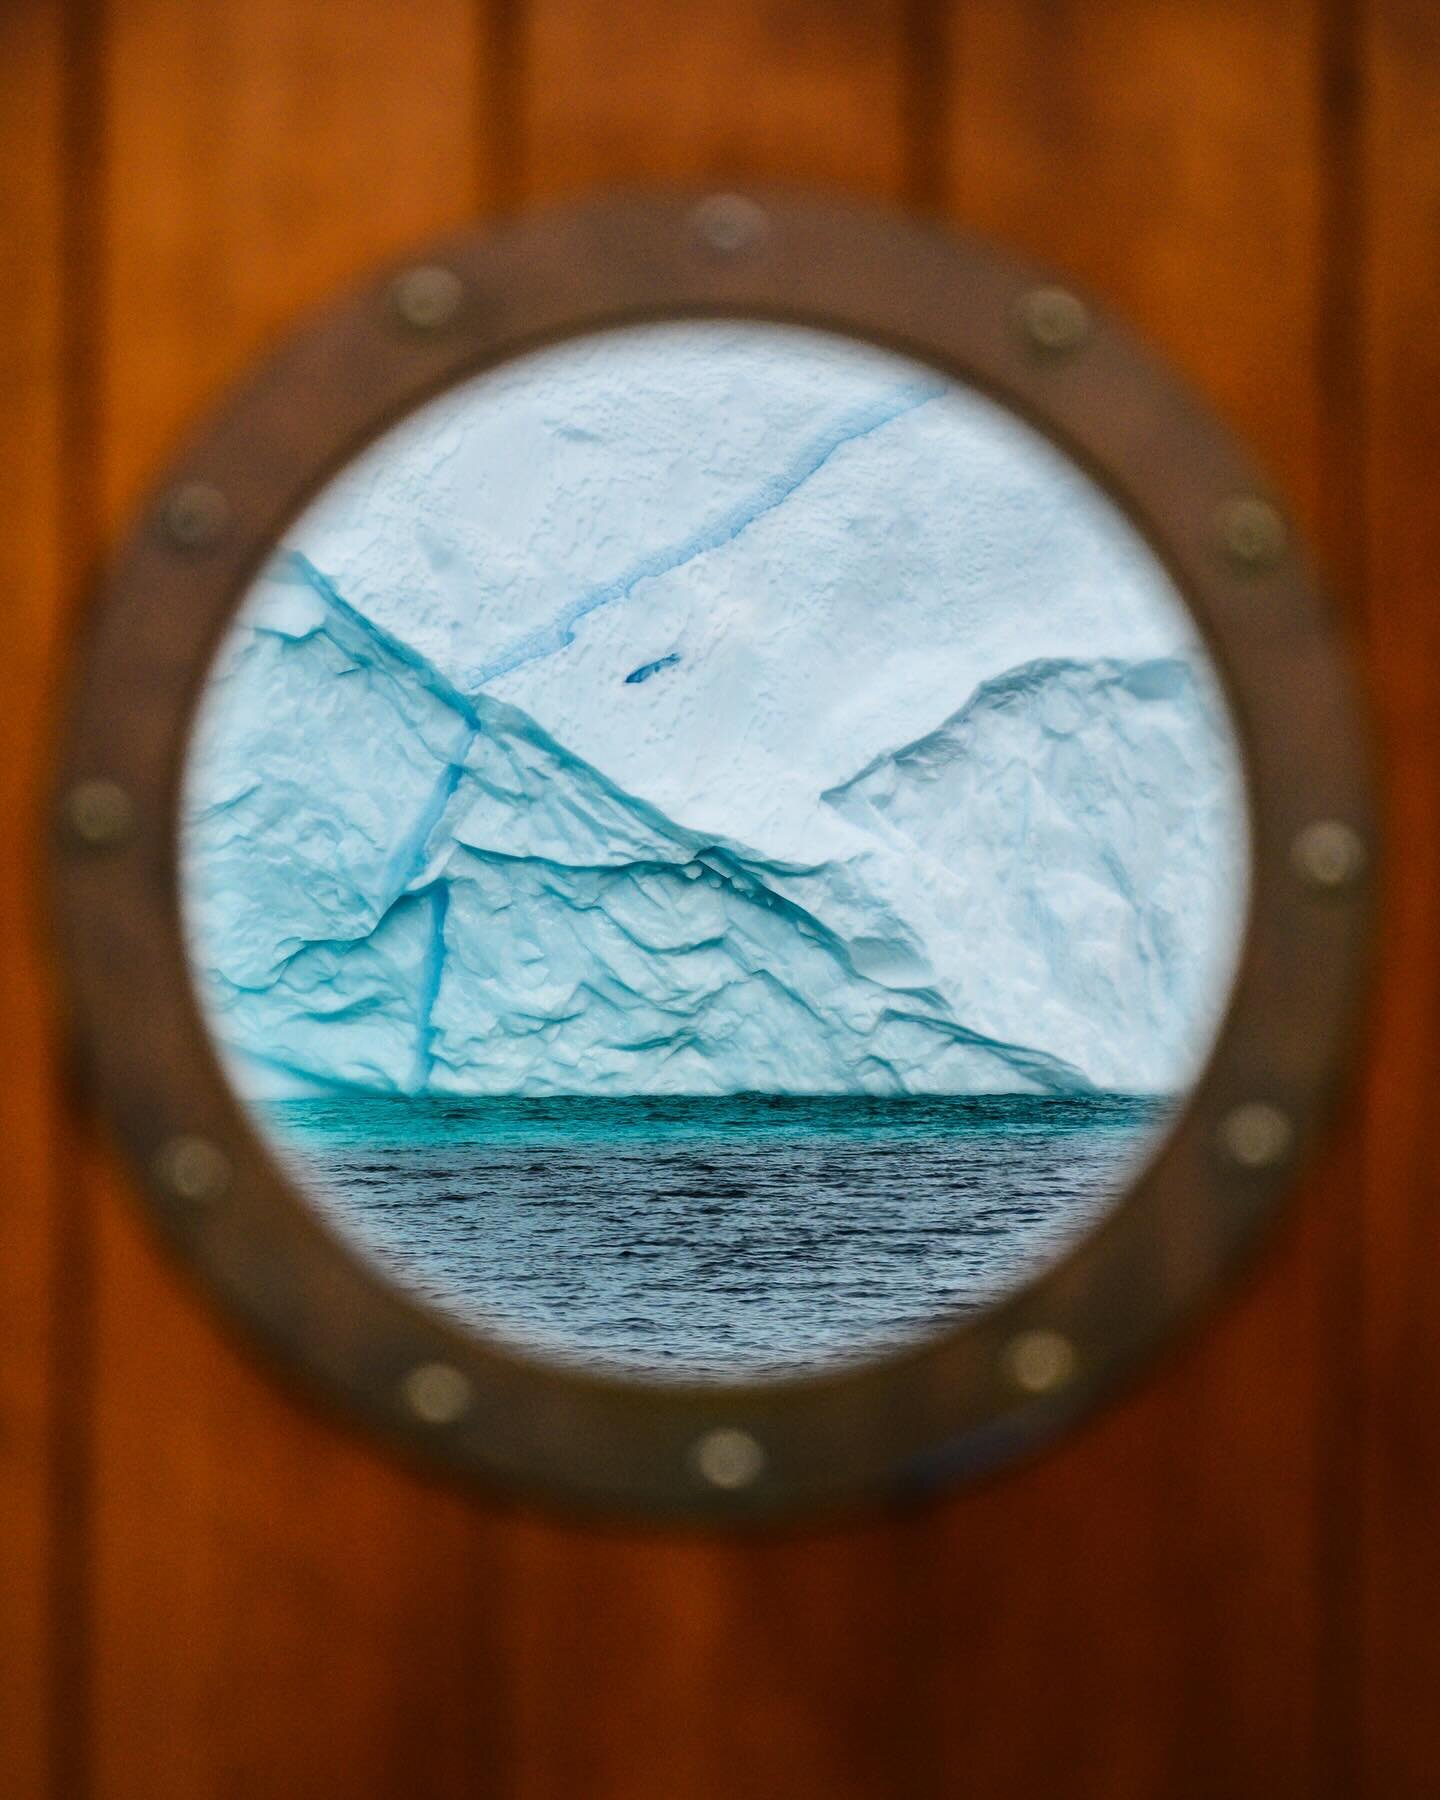 Your portal to another world, walking the fine line between destination and destiny. 

📷: @joe_shutter 

#greenland #arctic #expedition #iceberg